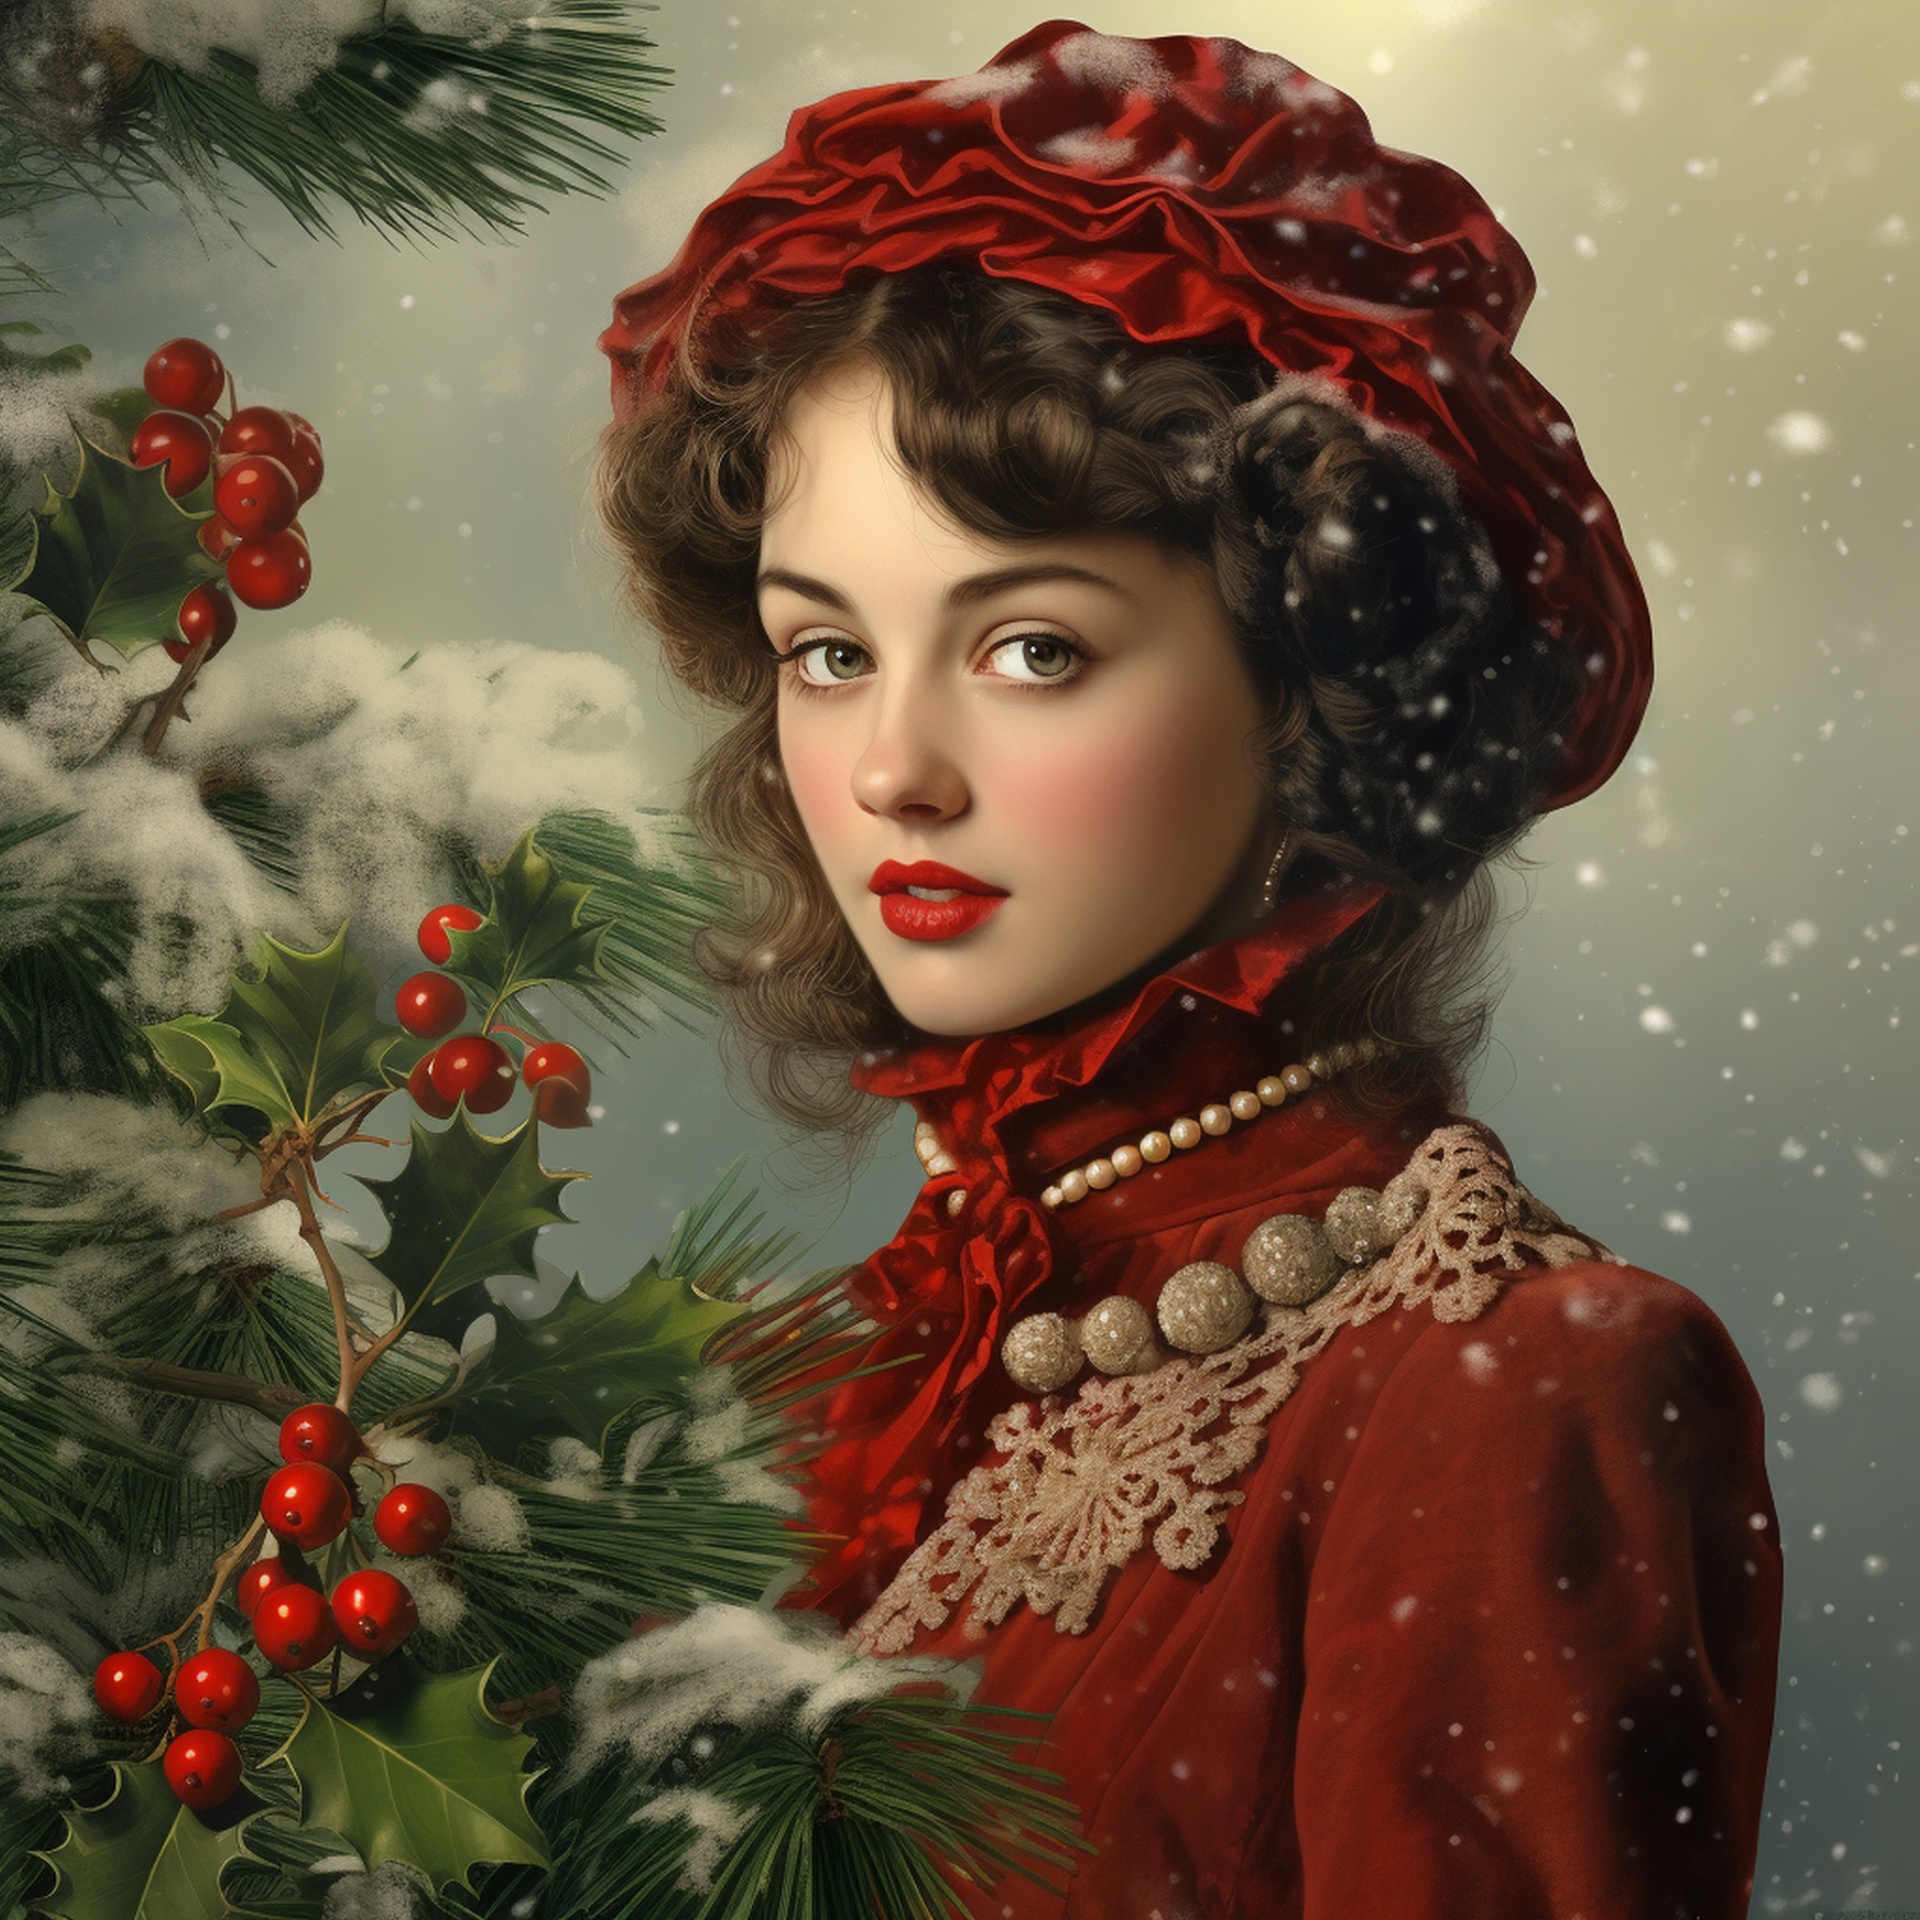 Christmas Victorian Woman Art Free Stock Photo - Public Domain Pictures